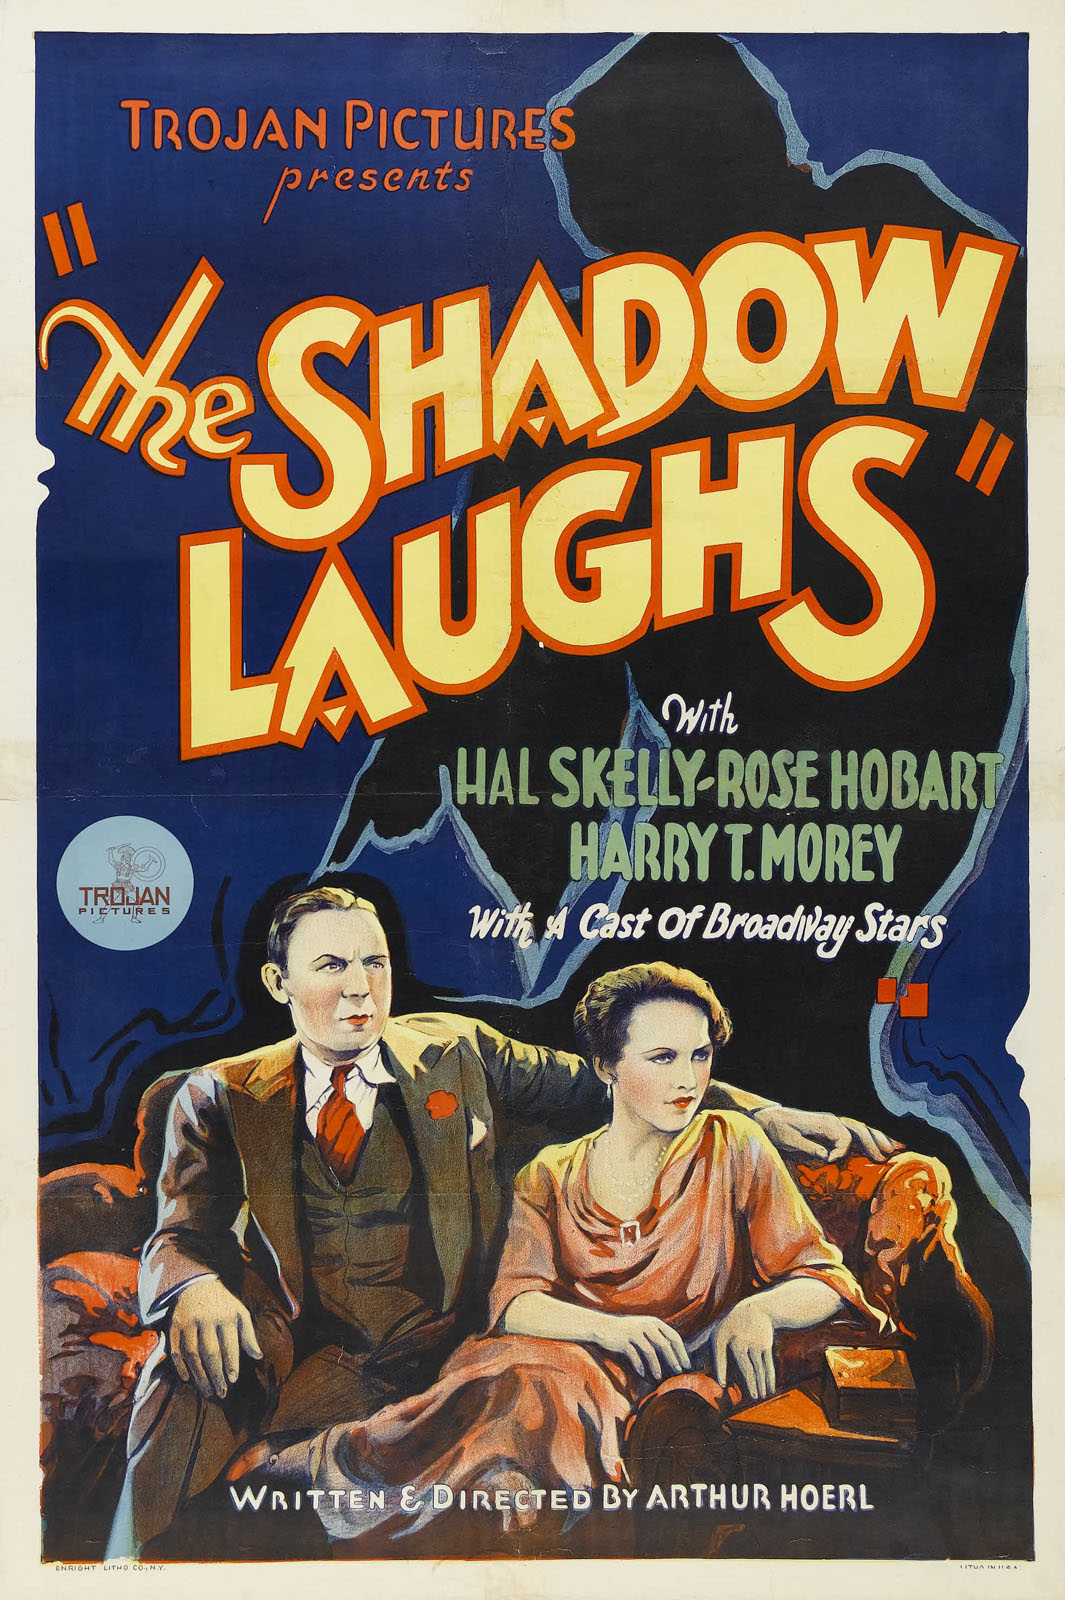 SHADOW LAUGHS, THE